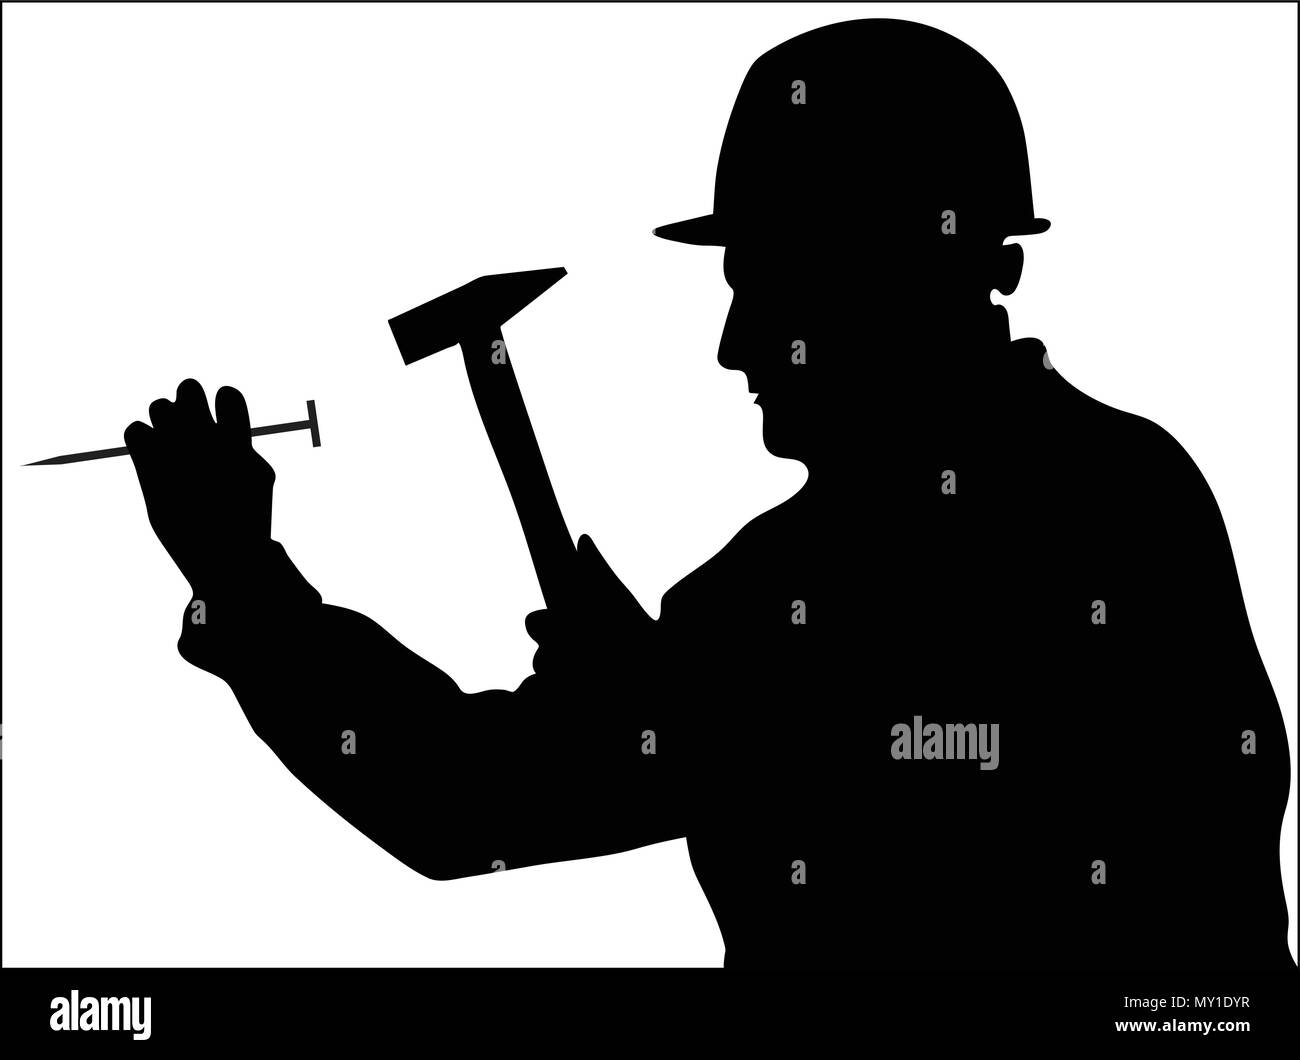 man uses a hammer to hit a nail vector silhouettes Stock Vector